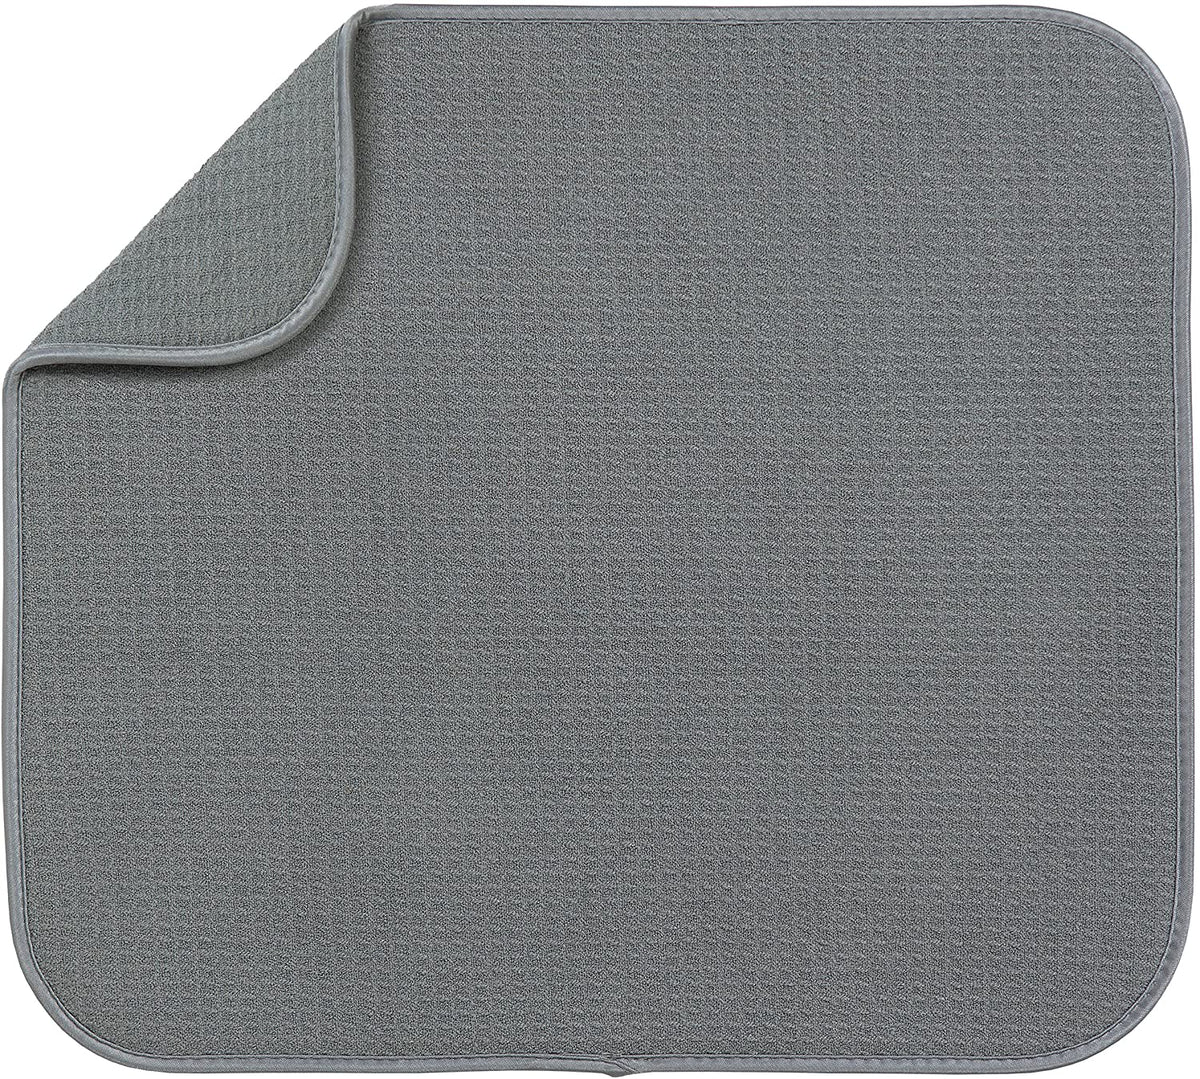 Envision Home Cream Dish Drying Mat to hand-wash dishes.